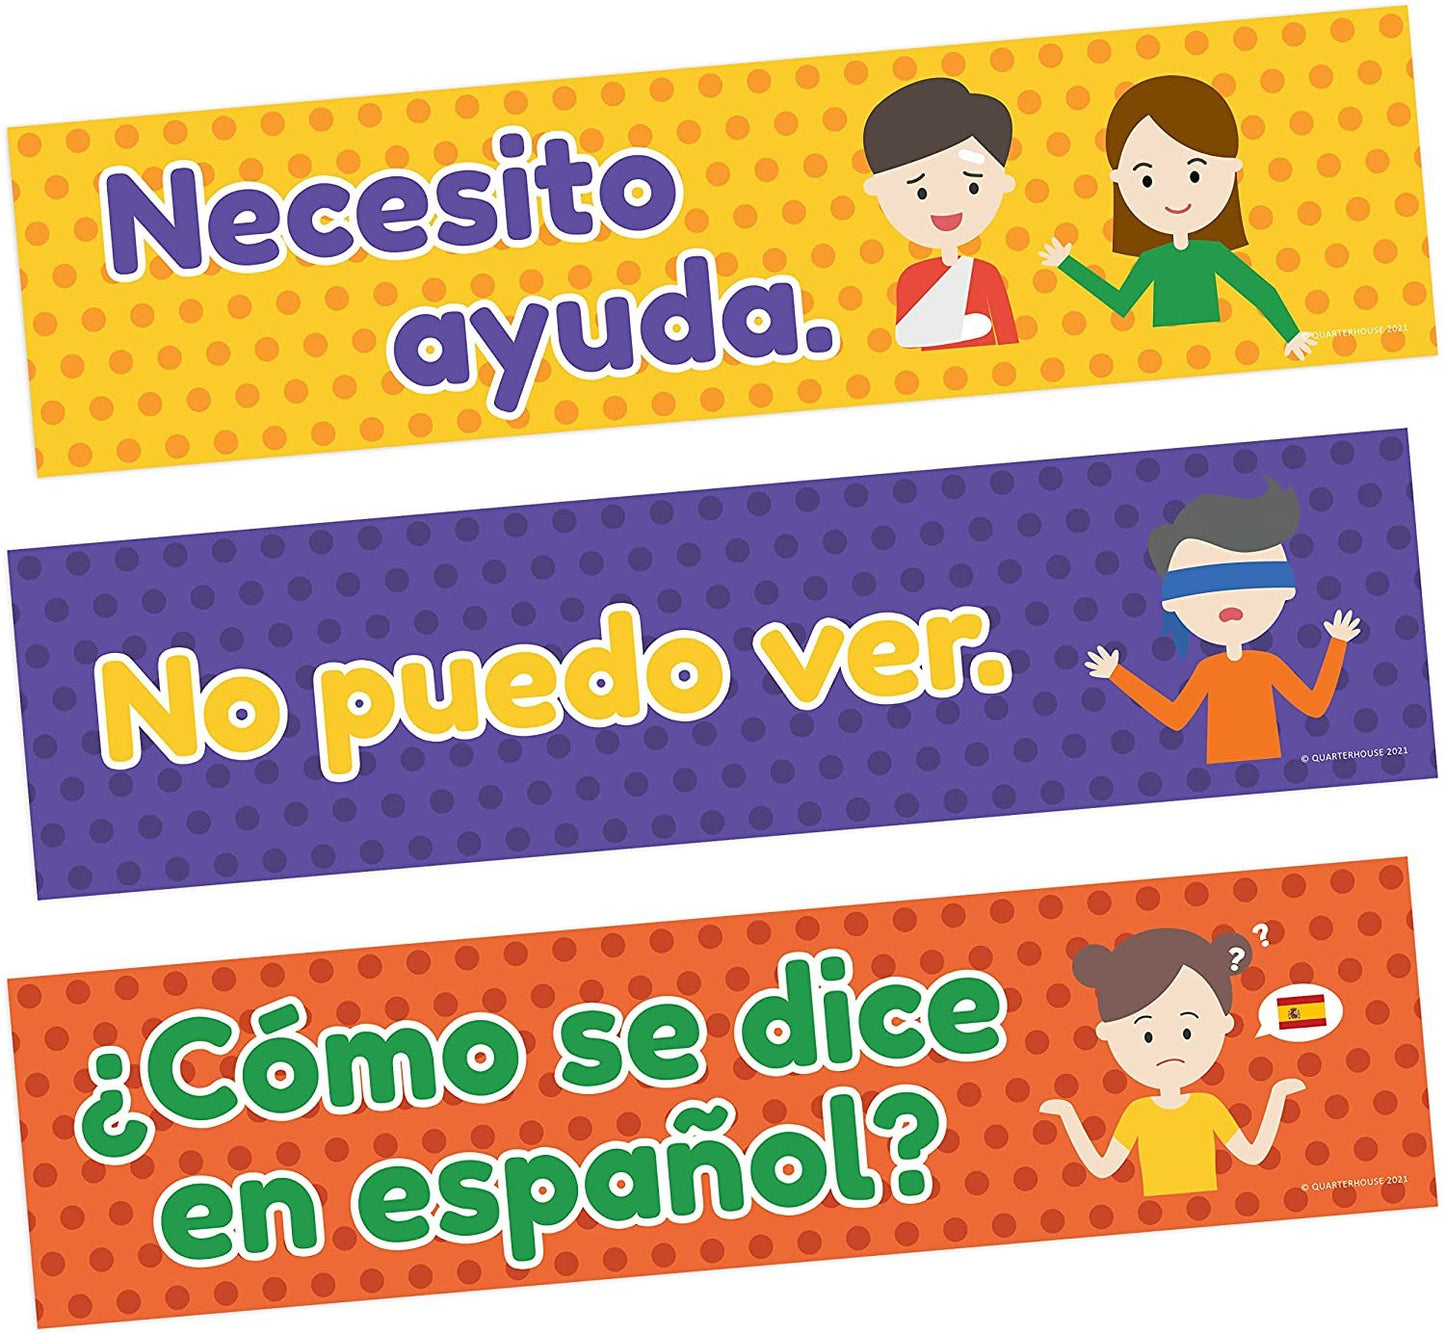 Quarterhouse Spanish Classroom Phrases and Commands Label Set, Spanish - ESL Classroom Learning Materials for K-12 Students and Teachers, Set of 18, 12 x 3 Inches, Extra Durable